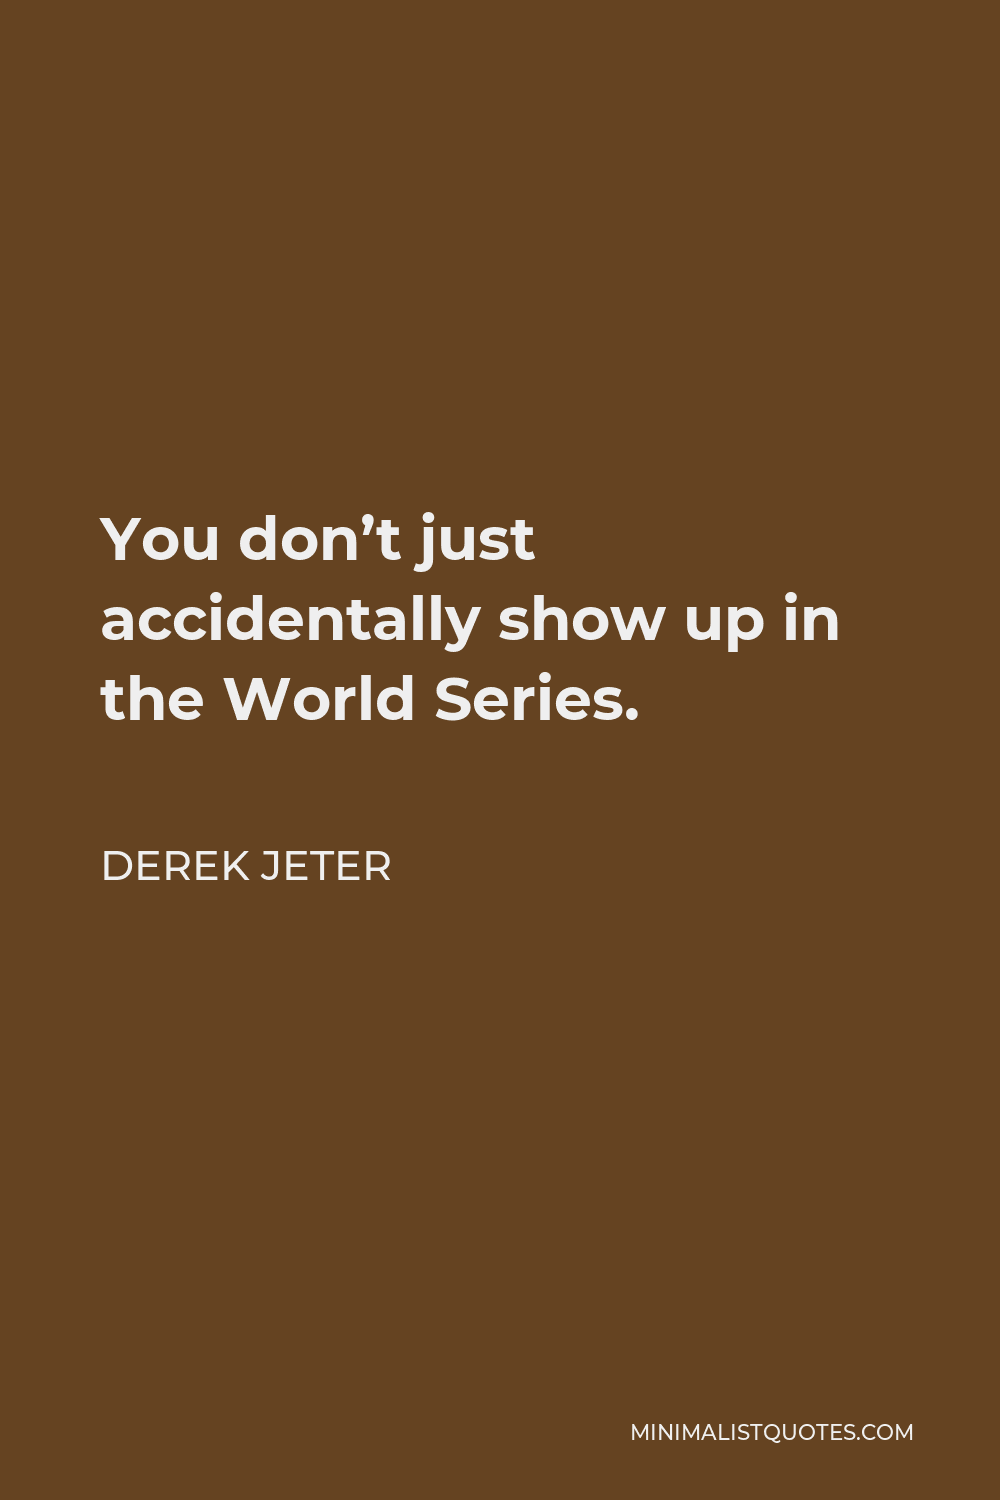 Derek Jeter Quote - You don’t just accidentally show up in the World Series.